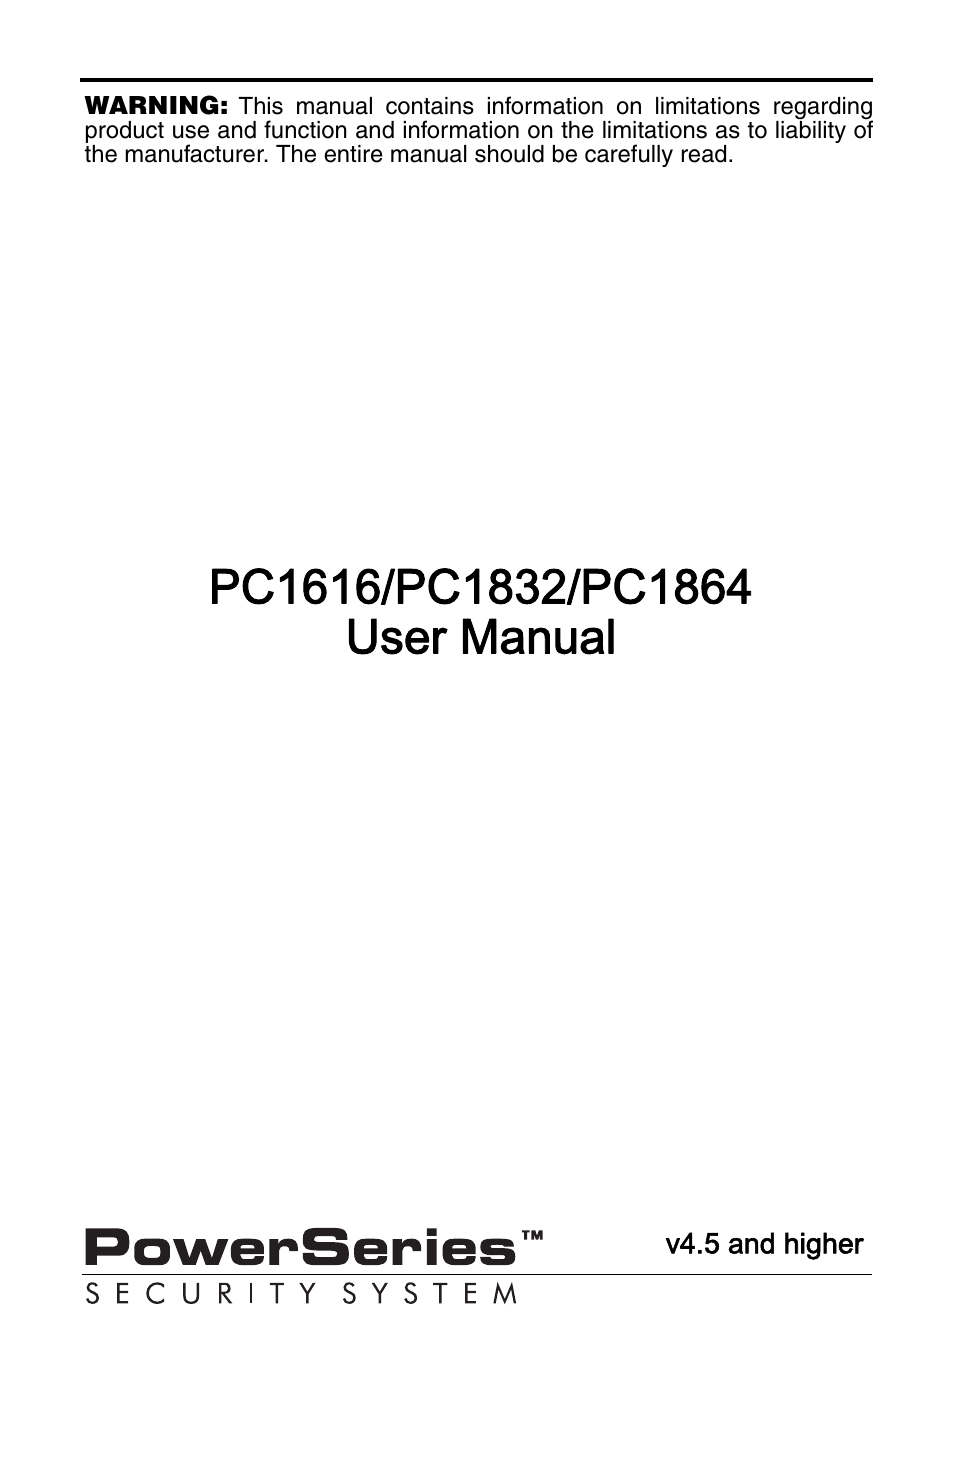 DSC POWERSERIES PC1616 User Manual | 24 pages